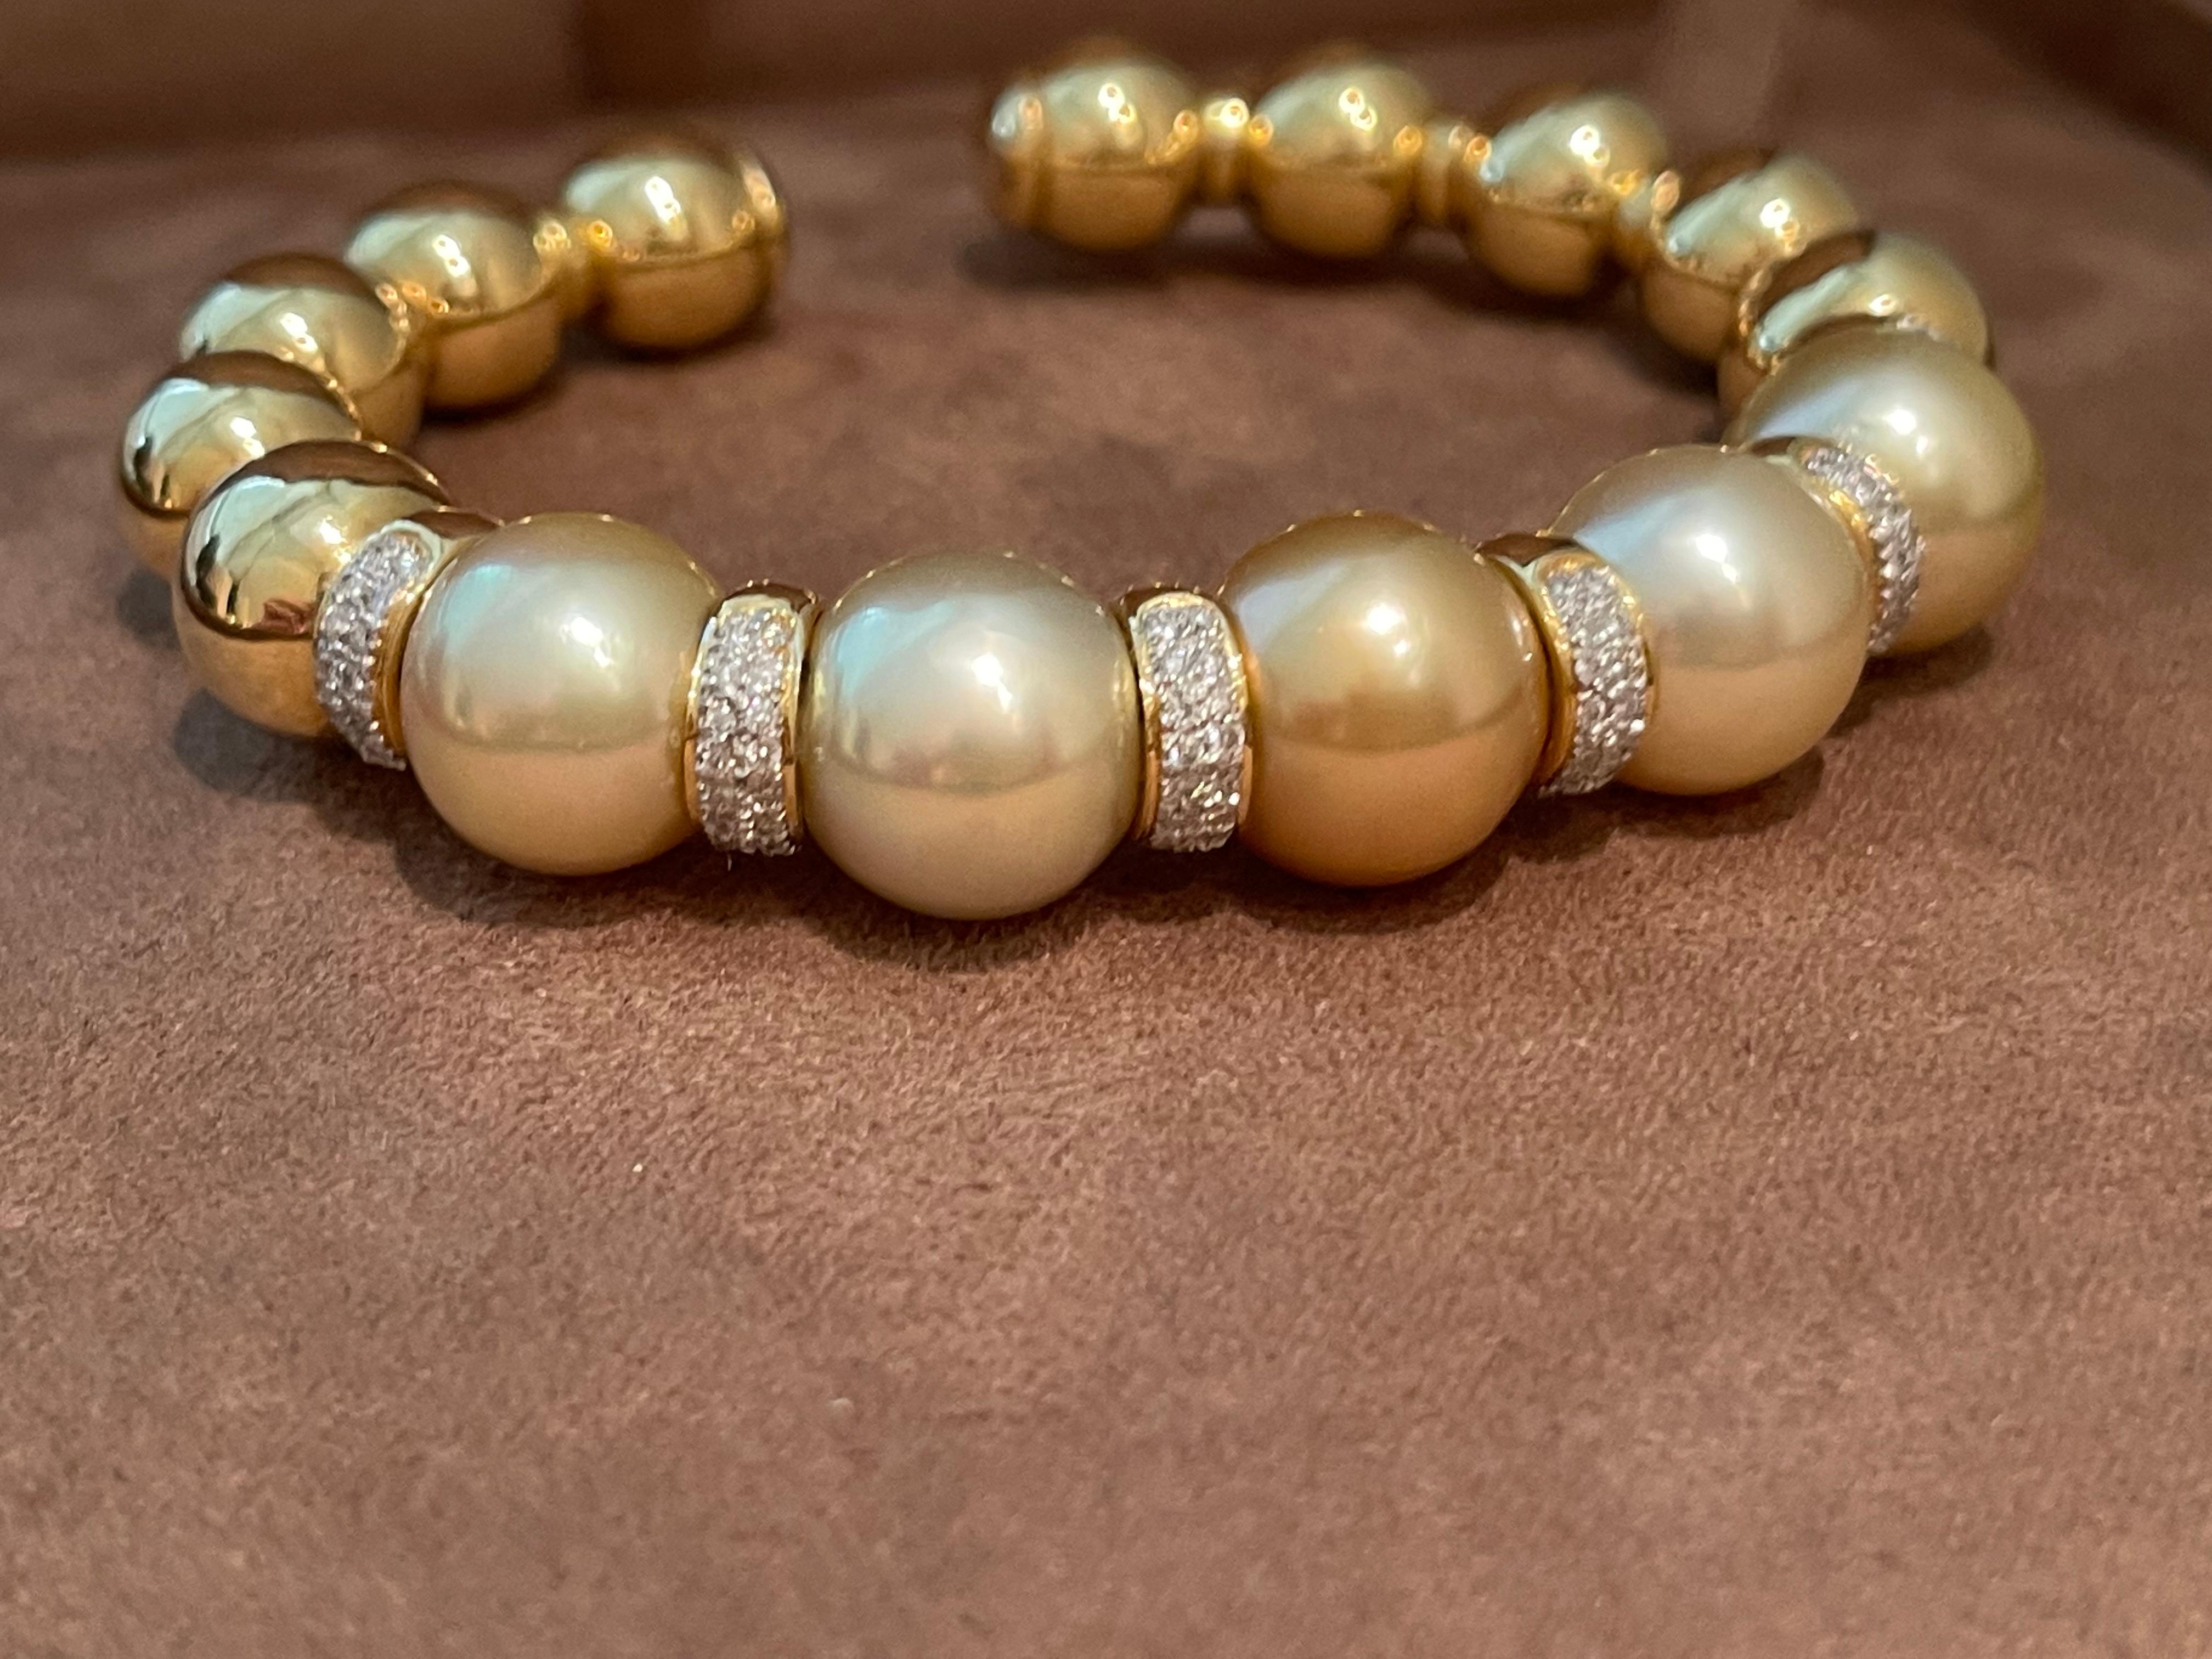 This elegant bracelet is set with 5 golden South Sea Pearls, accented with Diamond rondelles; set in 18-karat yellow gold. Flexible with open back. 96 Diamonds weighing 0.75 ct. South Sea pearls ranging from 12.5 mm- 13 mm. The bracelet measures 6